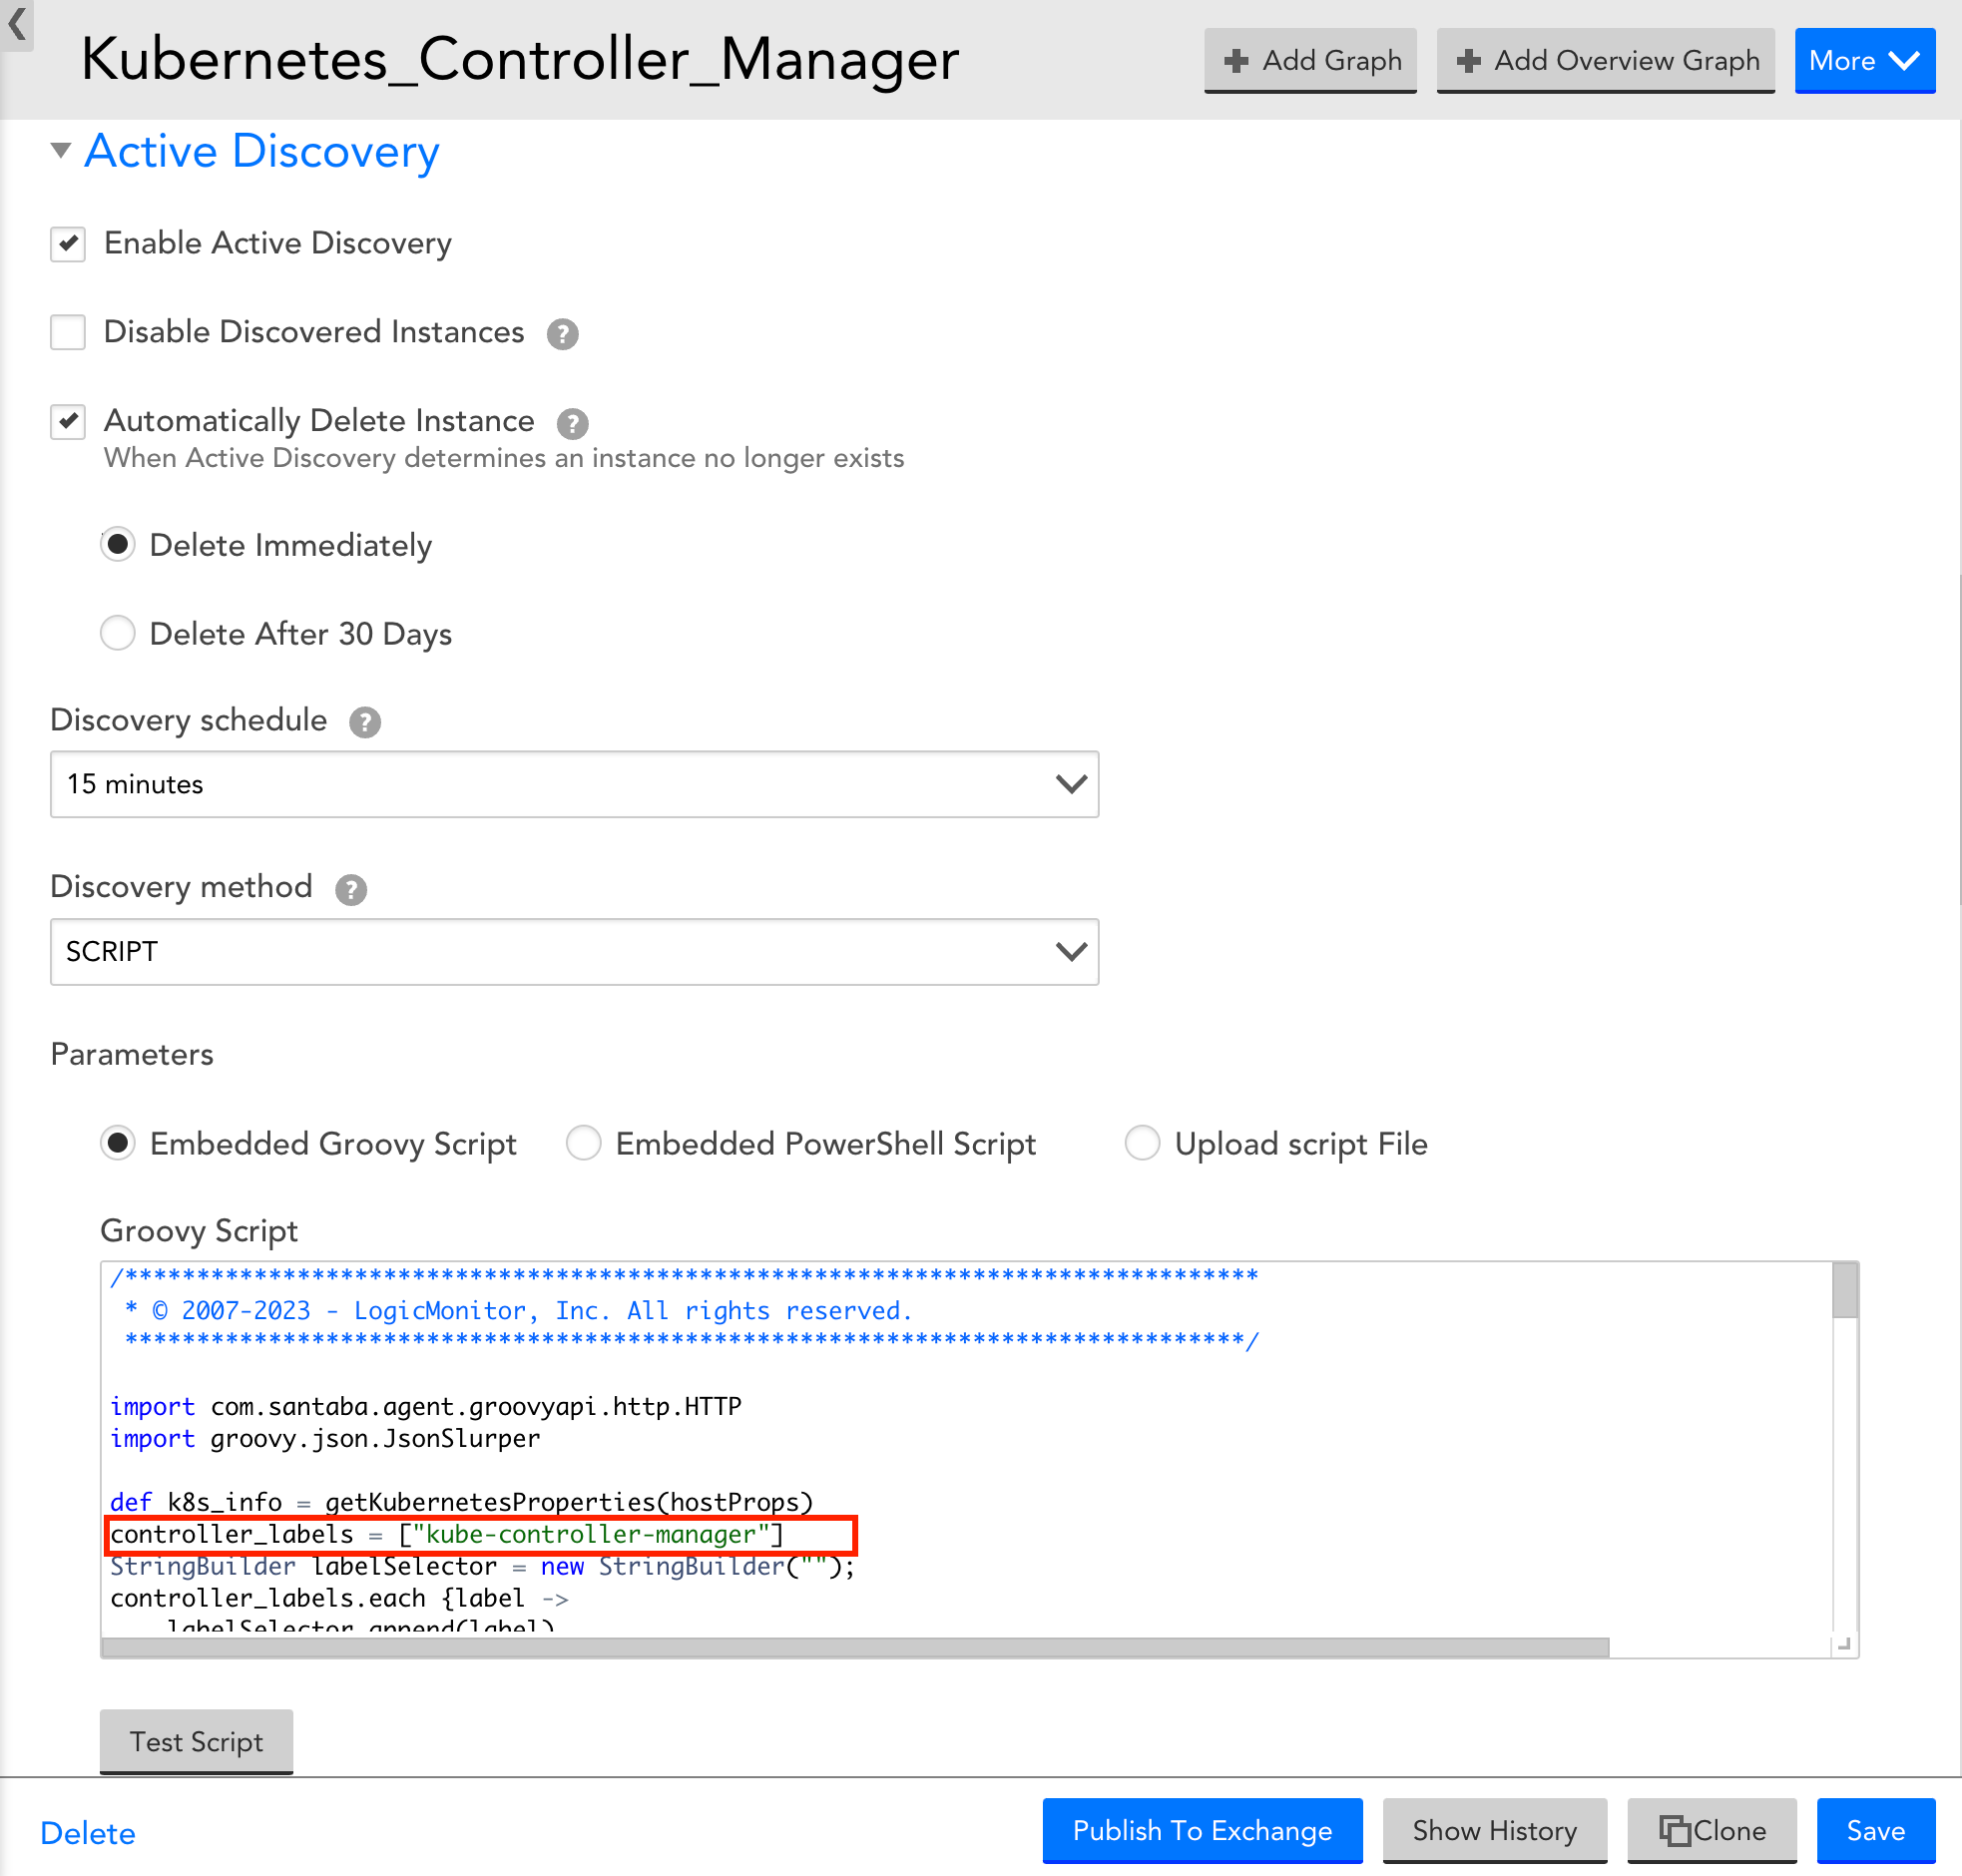 KCM Active Directory page